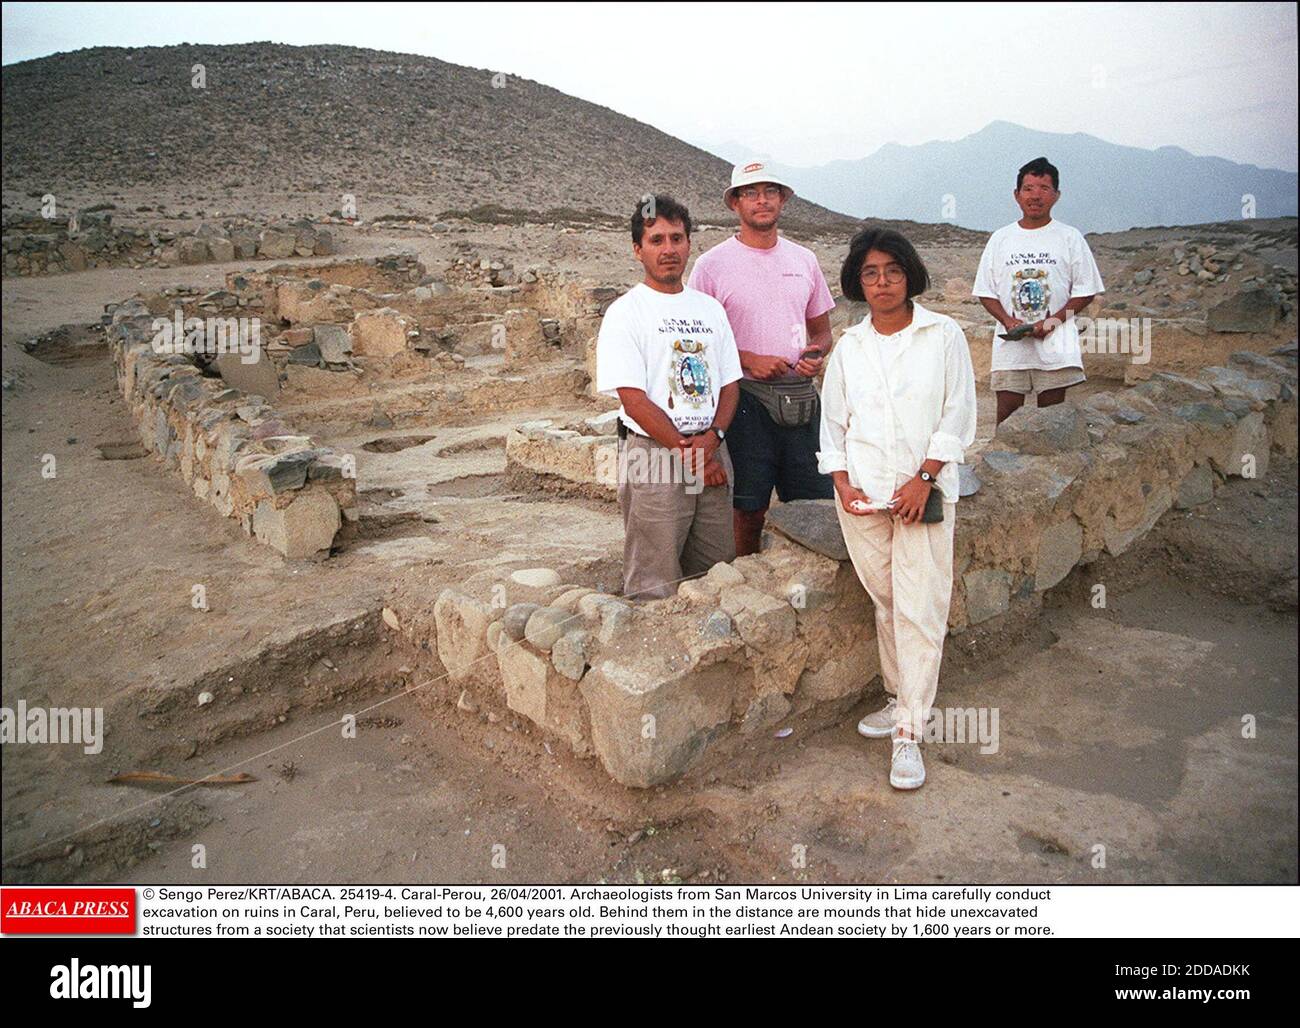 NO FILM, NO VIDEO, NO TV, NO DOCUMENTARY - © Sengo Perez/KRT/ABACA. 25419-4. Caral-Perou, 26/04/2001. Archaeologists from San Marcos University in Lima carefully conduct excavation on ruins in Caral, Peru, believed to be 4,600 years old. Behind them in the distance are mounds that hide unexcavated Stock Photo